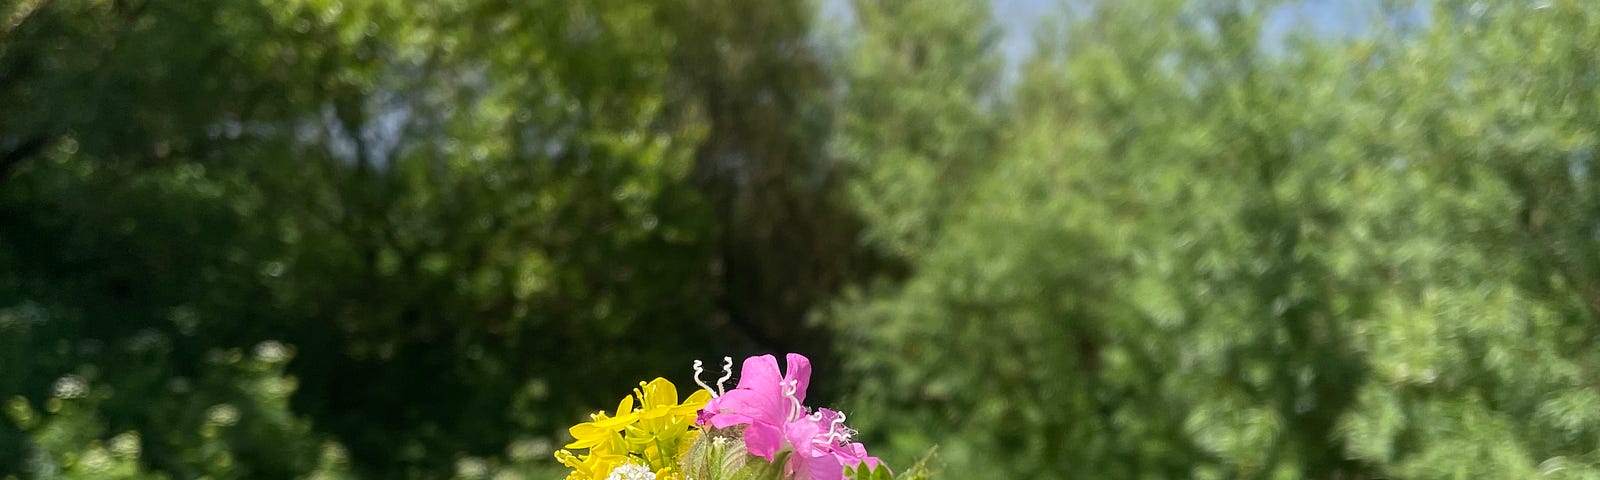 Tiny bouquet of flowers picked by a river